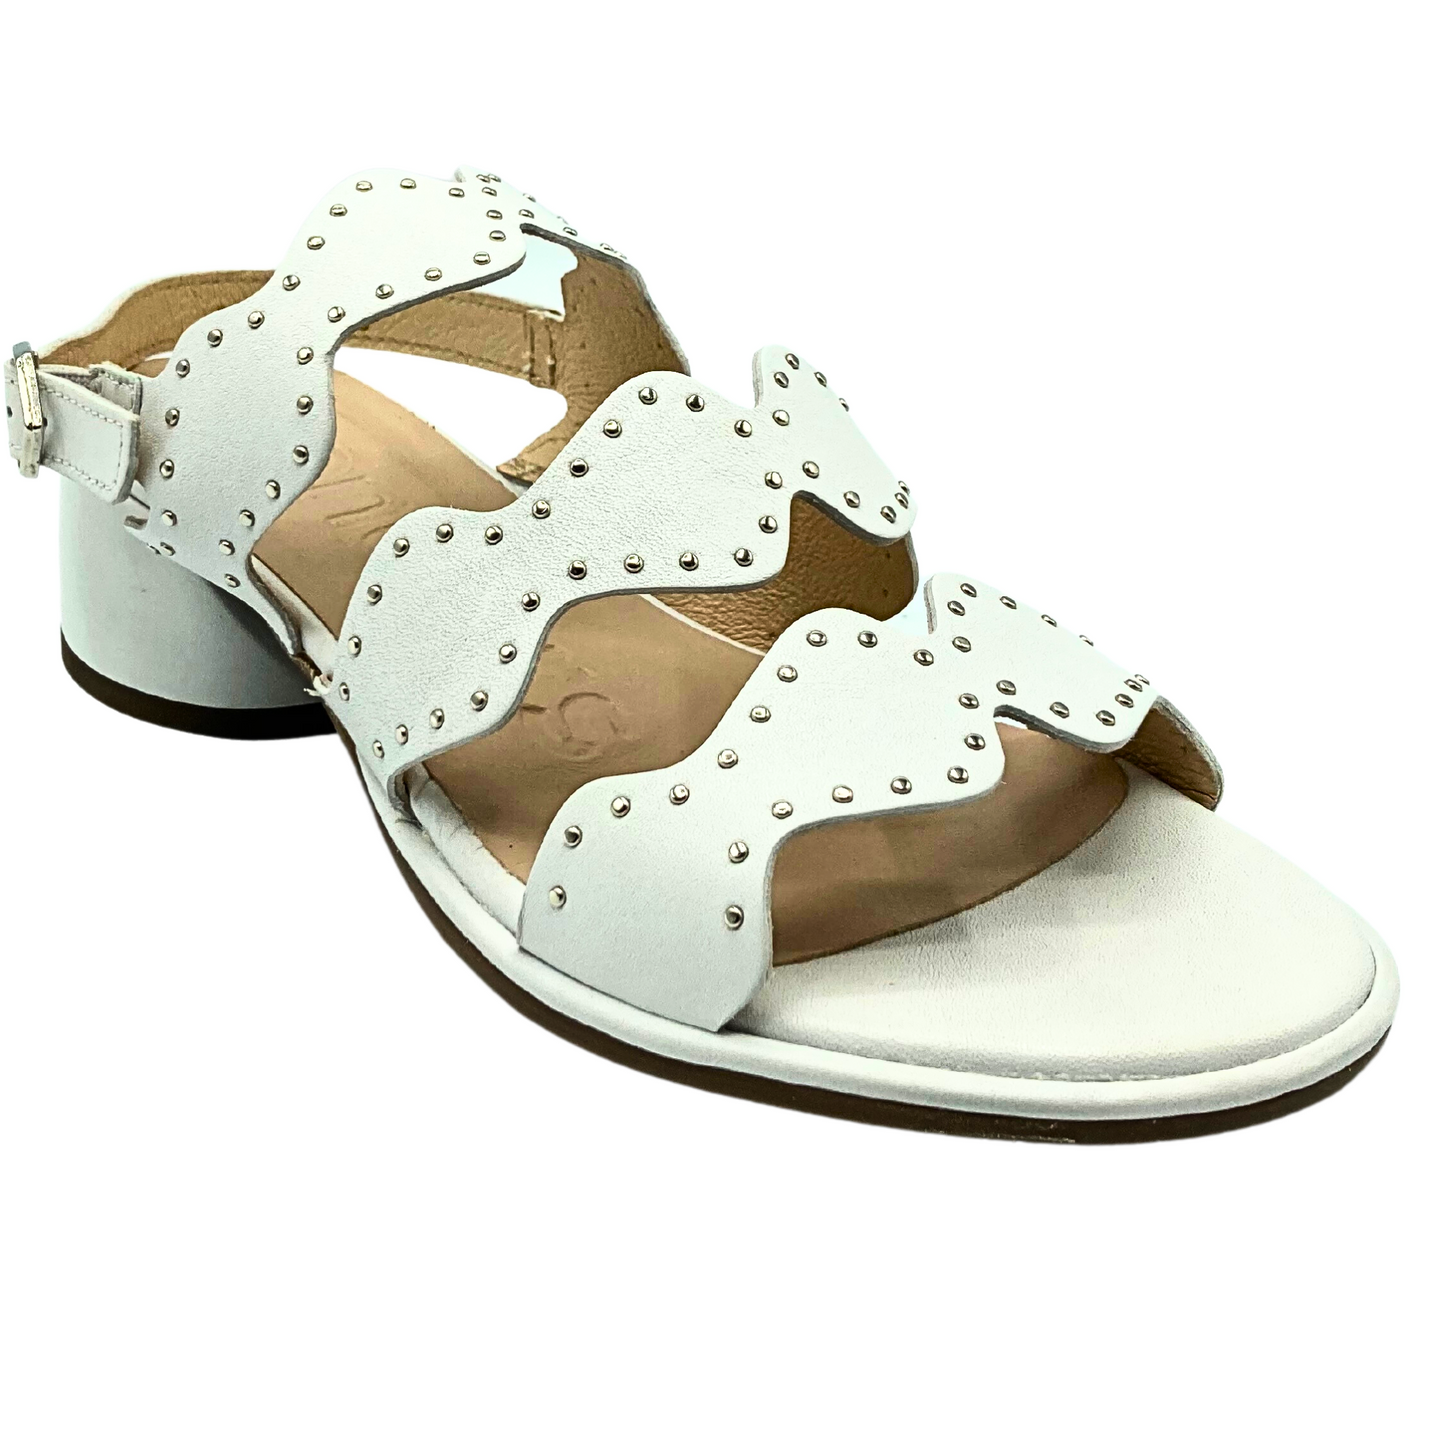 Angled front view of a summer sandal in white leather with tiny silver stud details around the scalloped straps